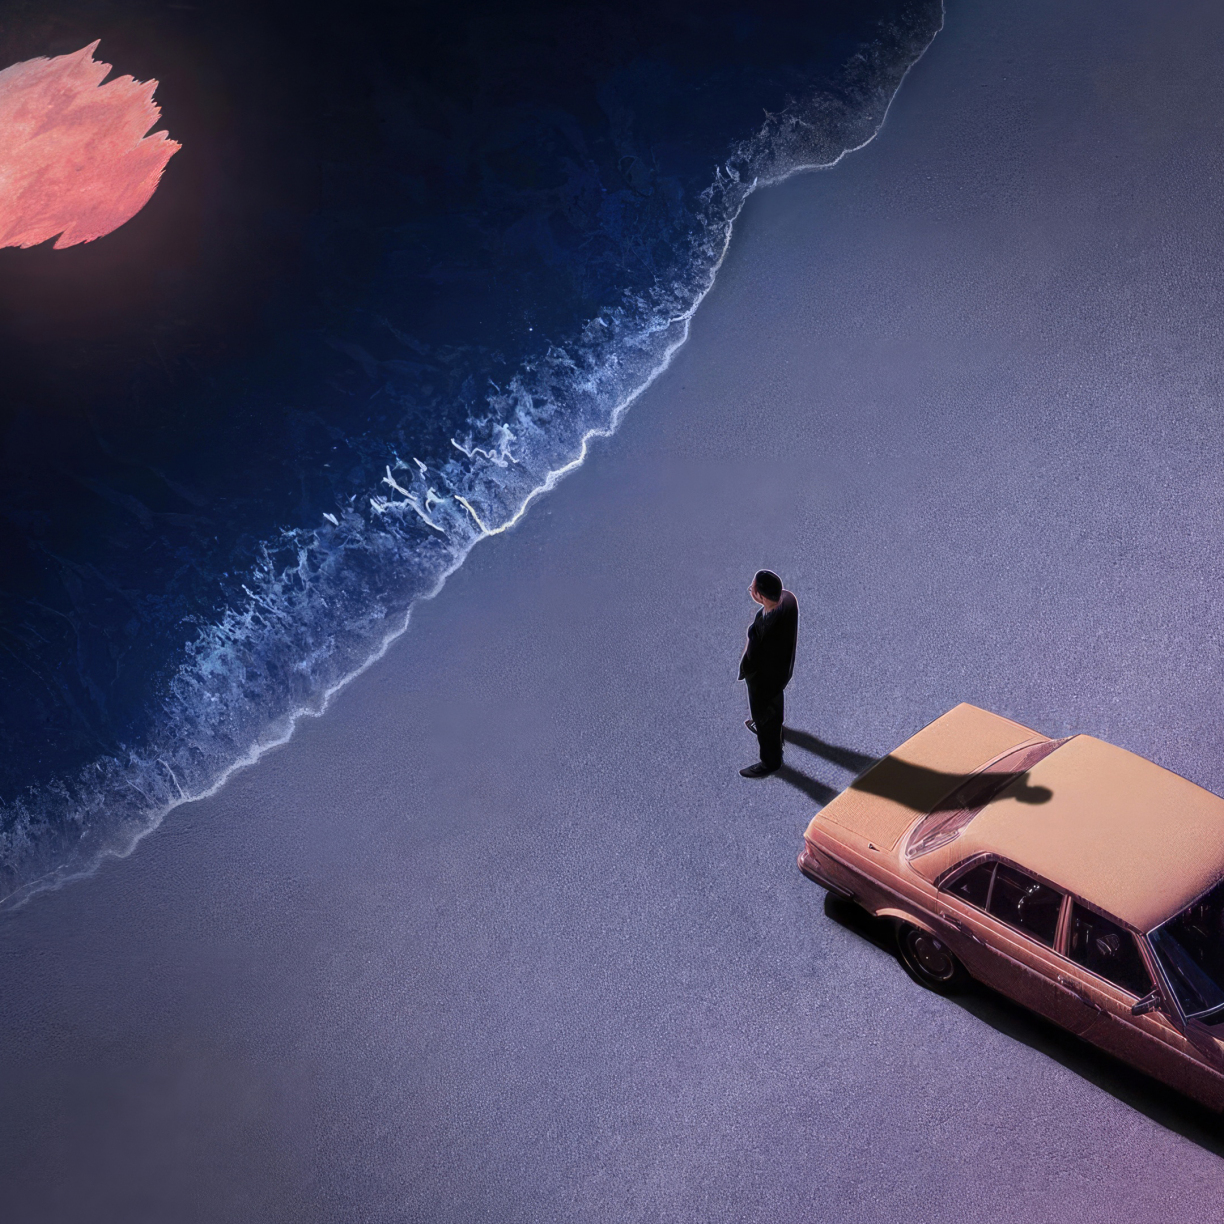 Lonely at night at the beach, car and man, art , 1224x1224 wallpaper